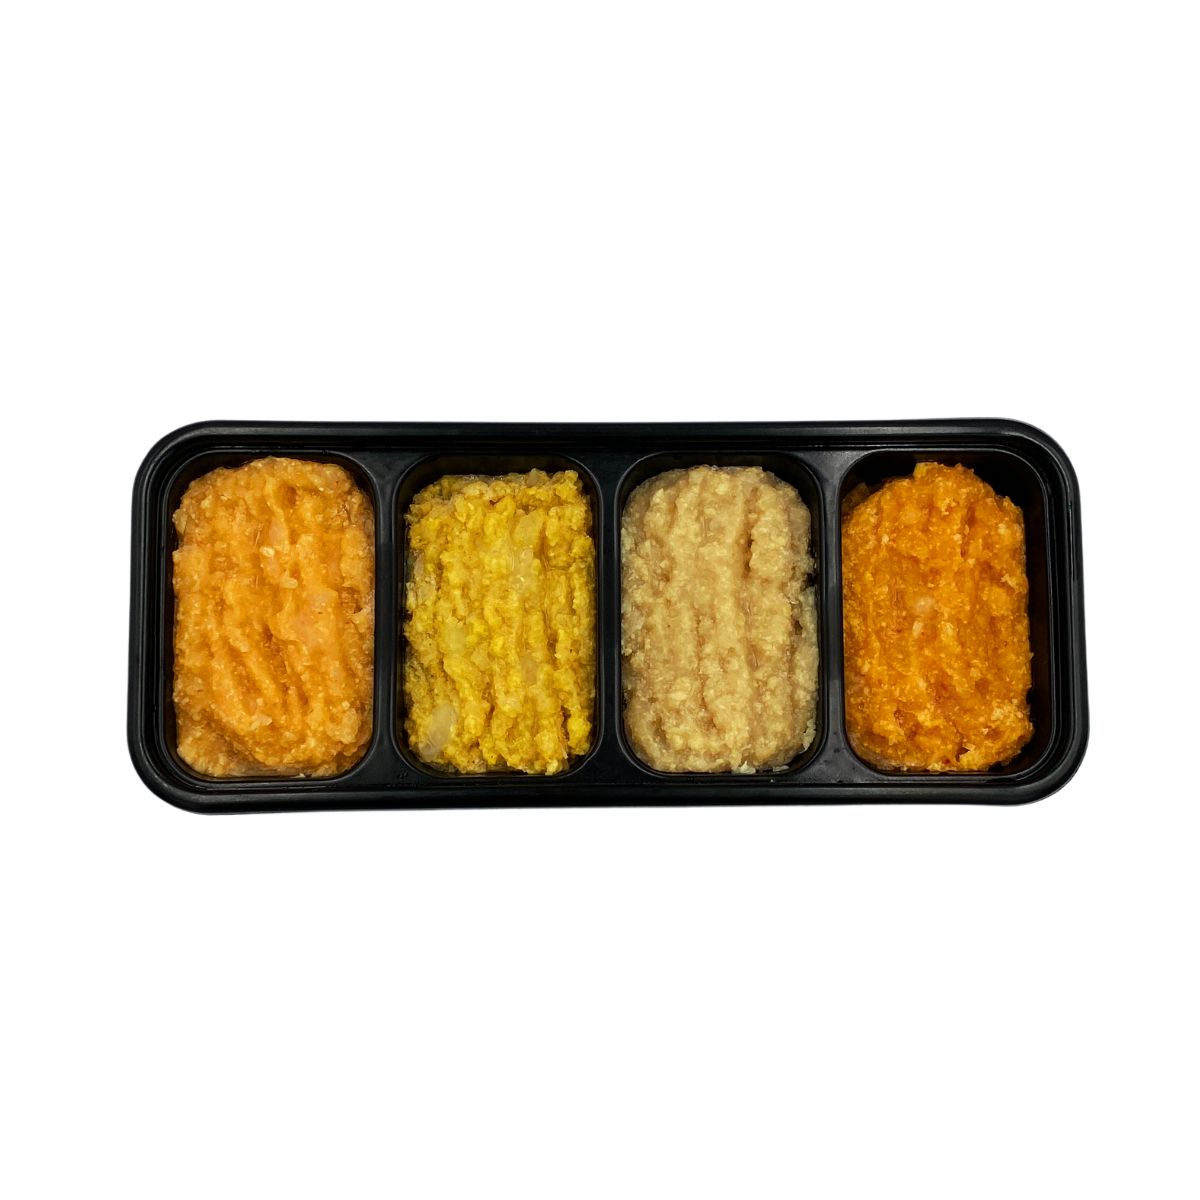 Minced & Moist Fish - 4pc - 11g Protein